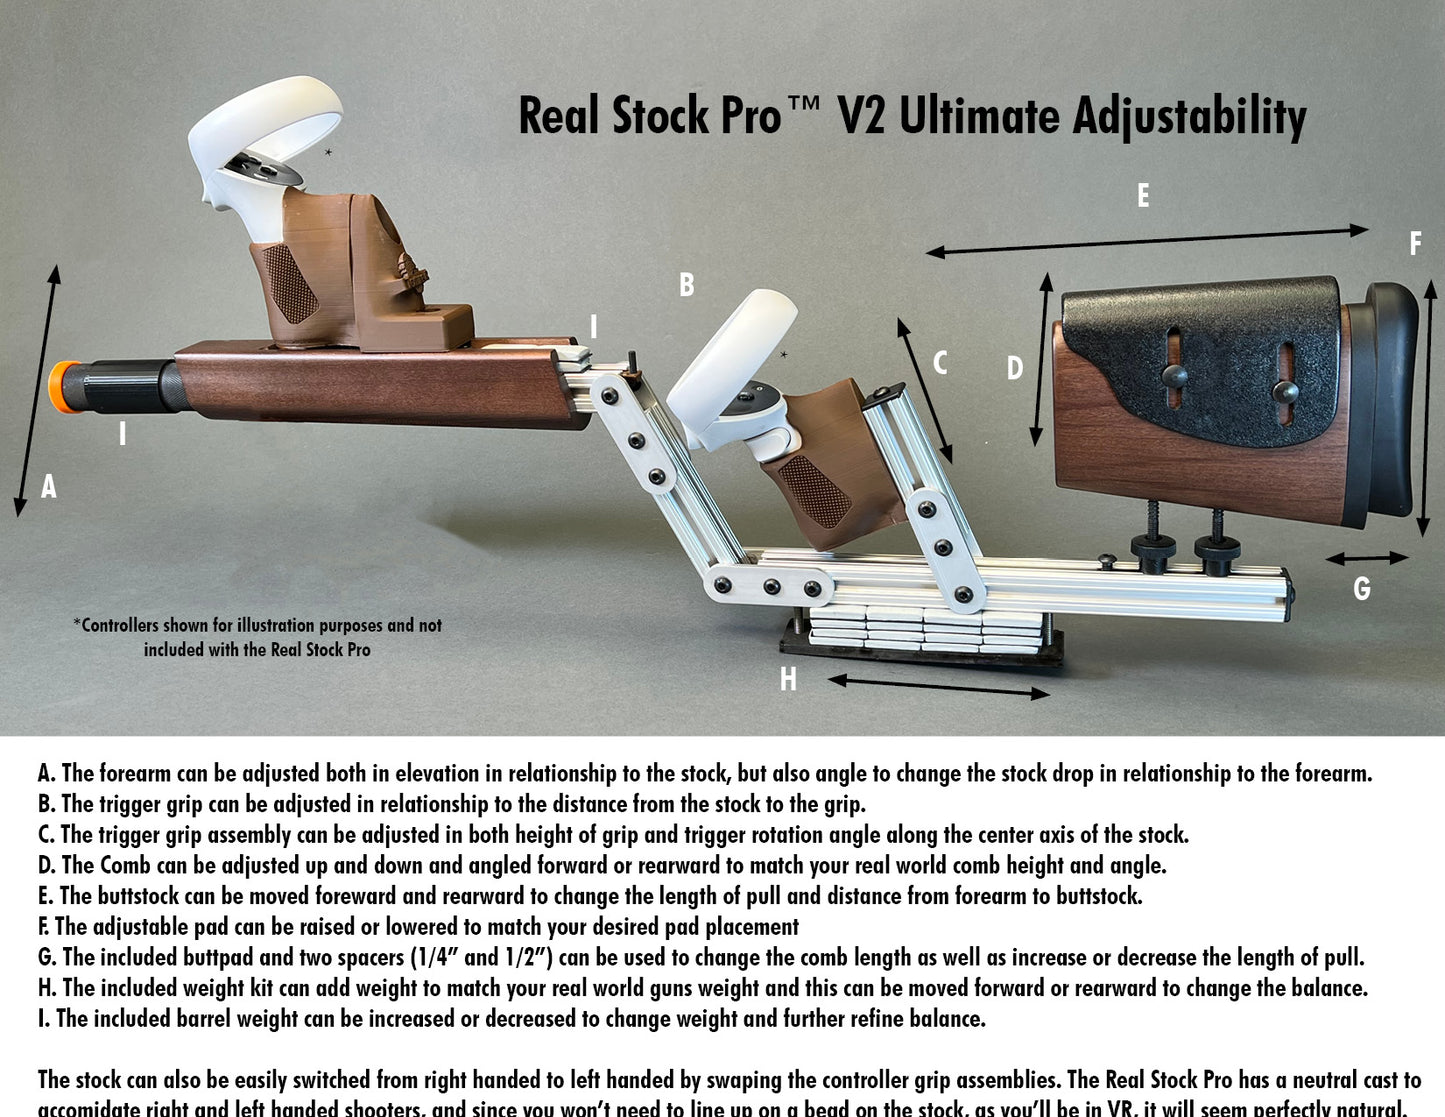 2. The Real Stock Pro™ V2 Ultimate